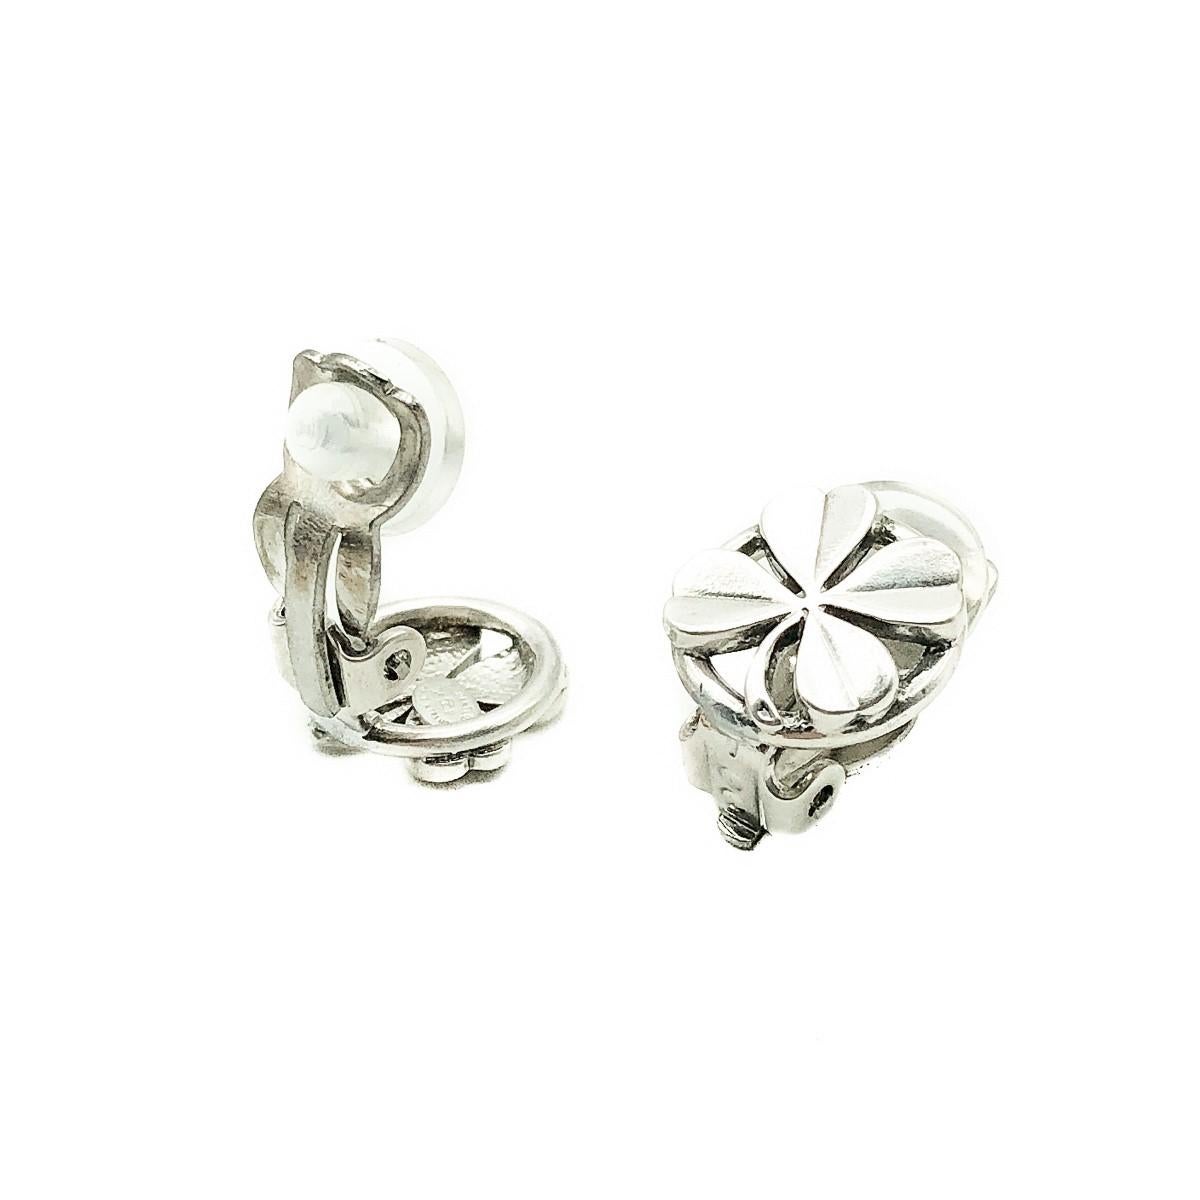 A delightful touch of couture. Vintage Chanel Lucky Shamrock Earrings. Featuring a four leaf clover symbolising luck and one of Coco Chanel's talismans. Crafted in silver tone metal. In very good vintage condition, signed, approx. 1.2cm diameter.